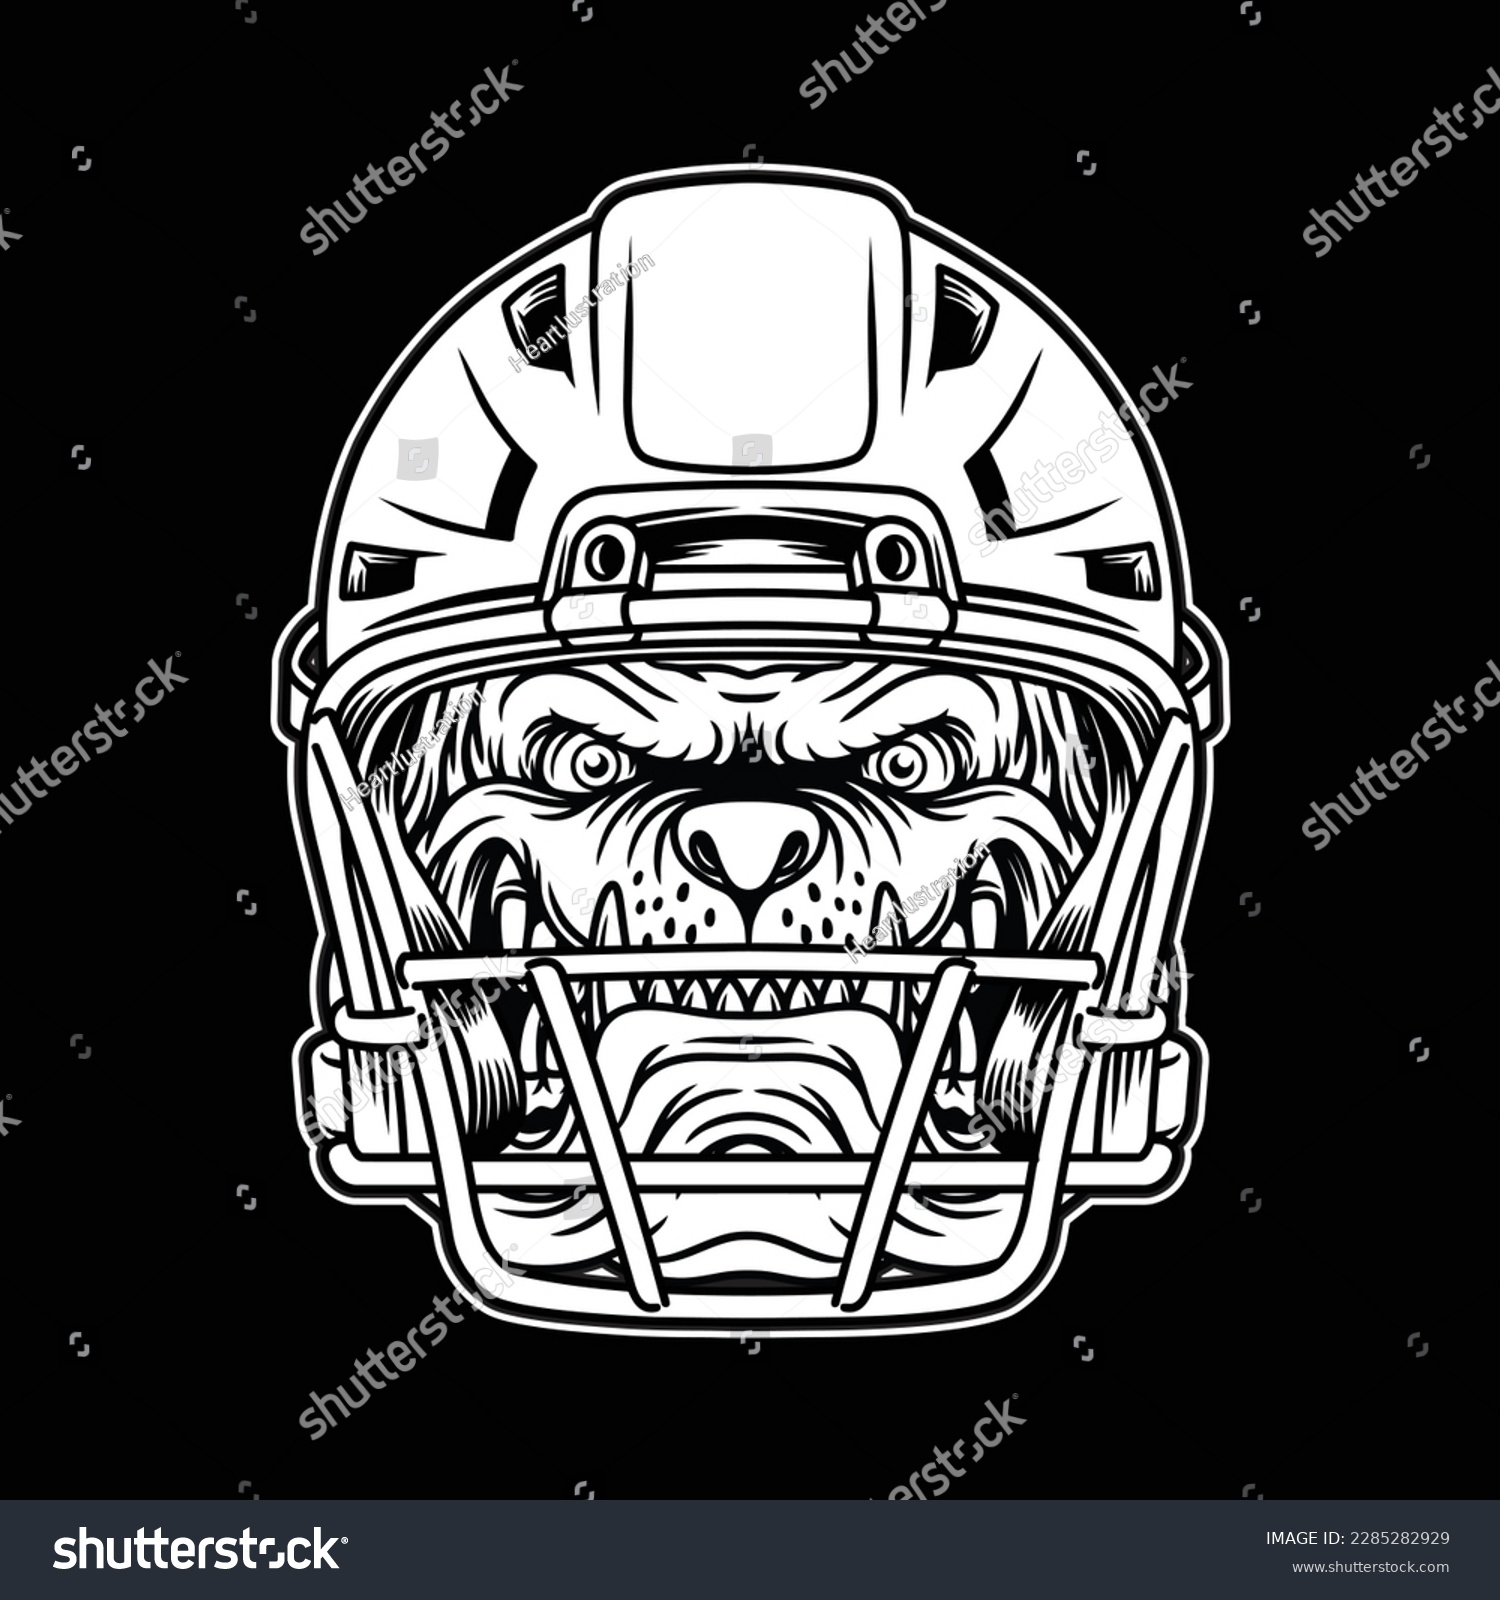 SVG of black and white image showing a bulldog who became the mascot of American football, and wore the helmet of an American football player. svg